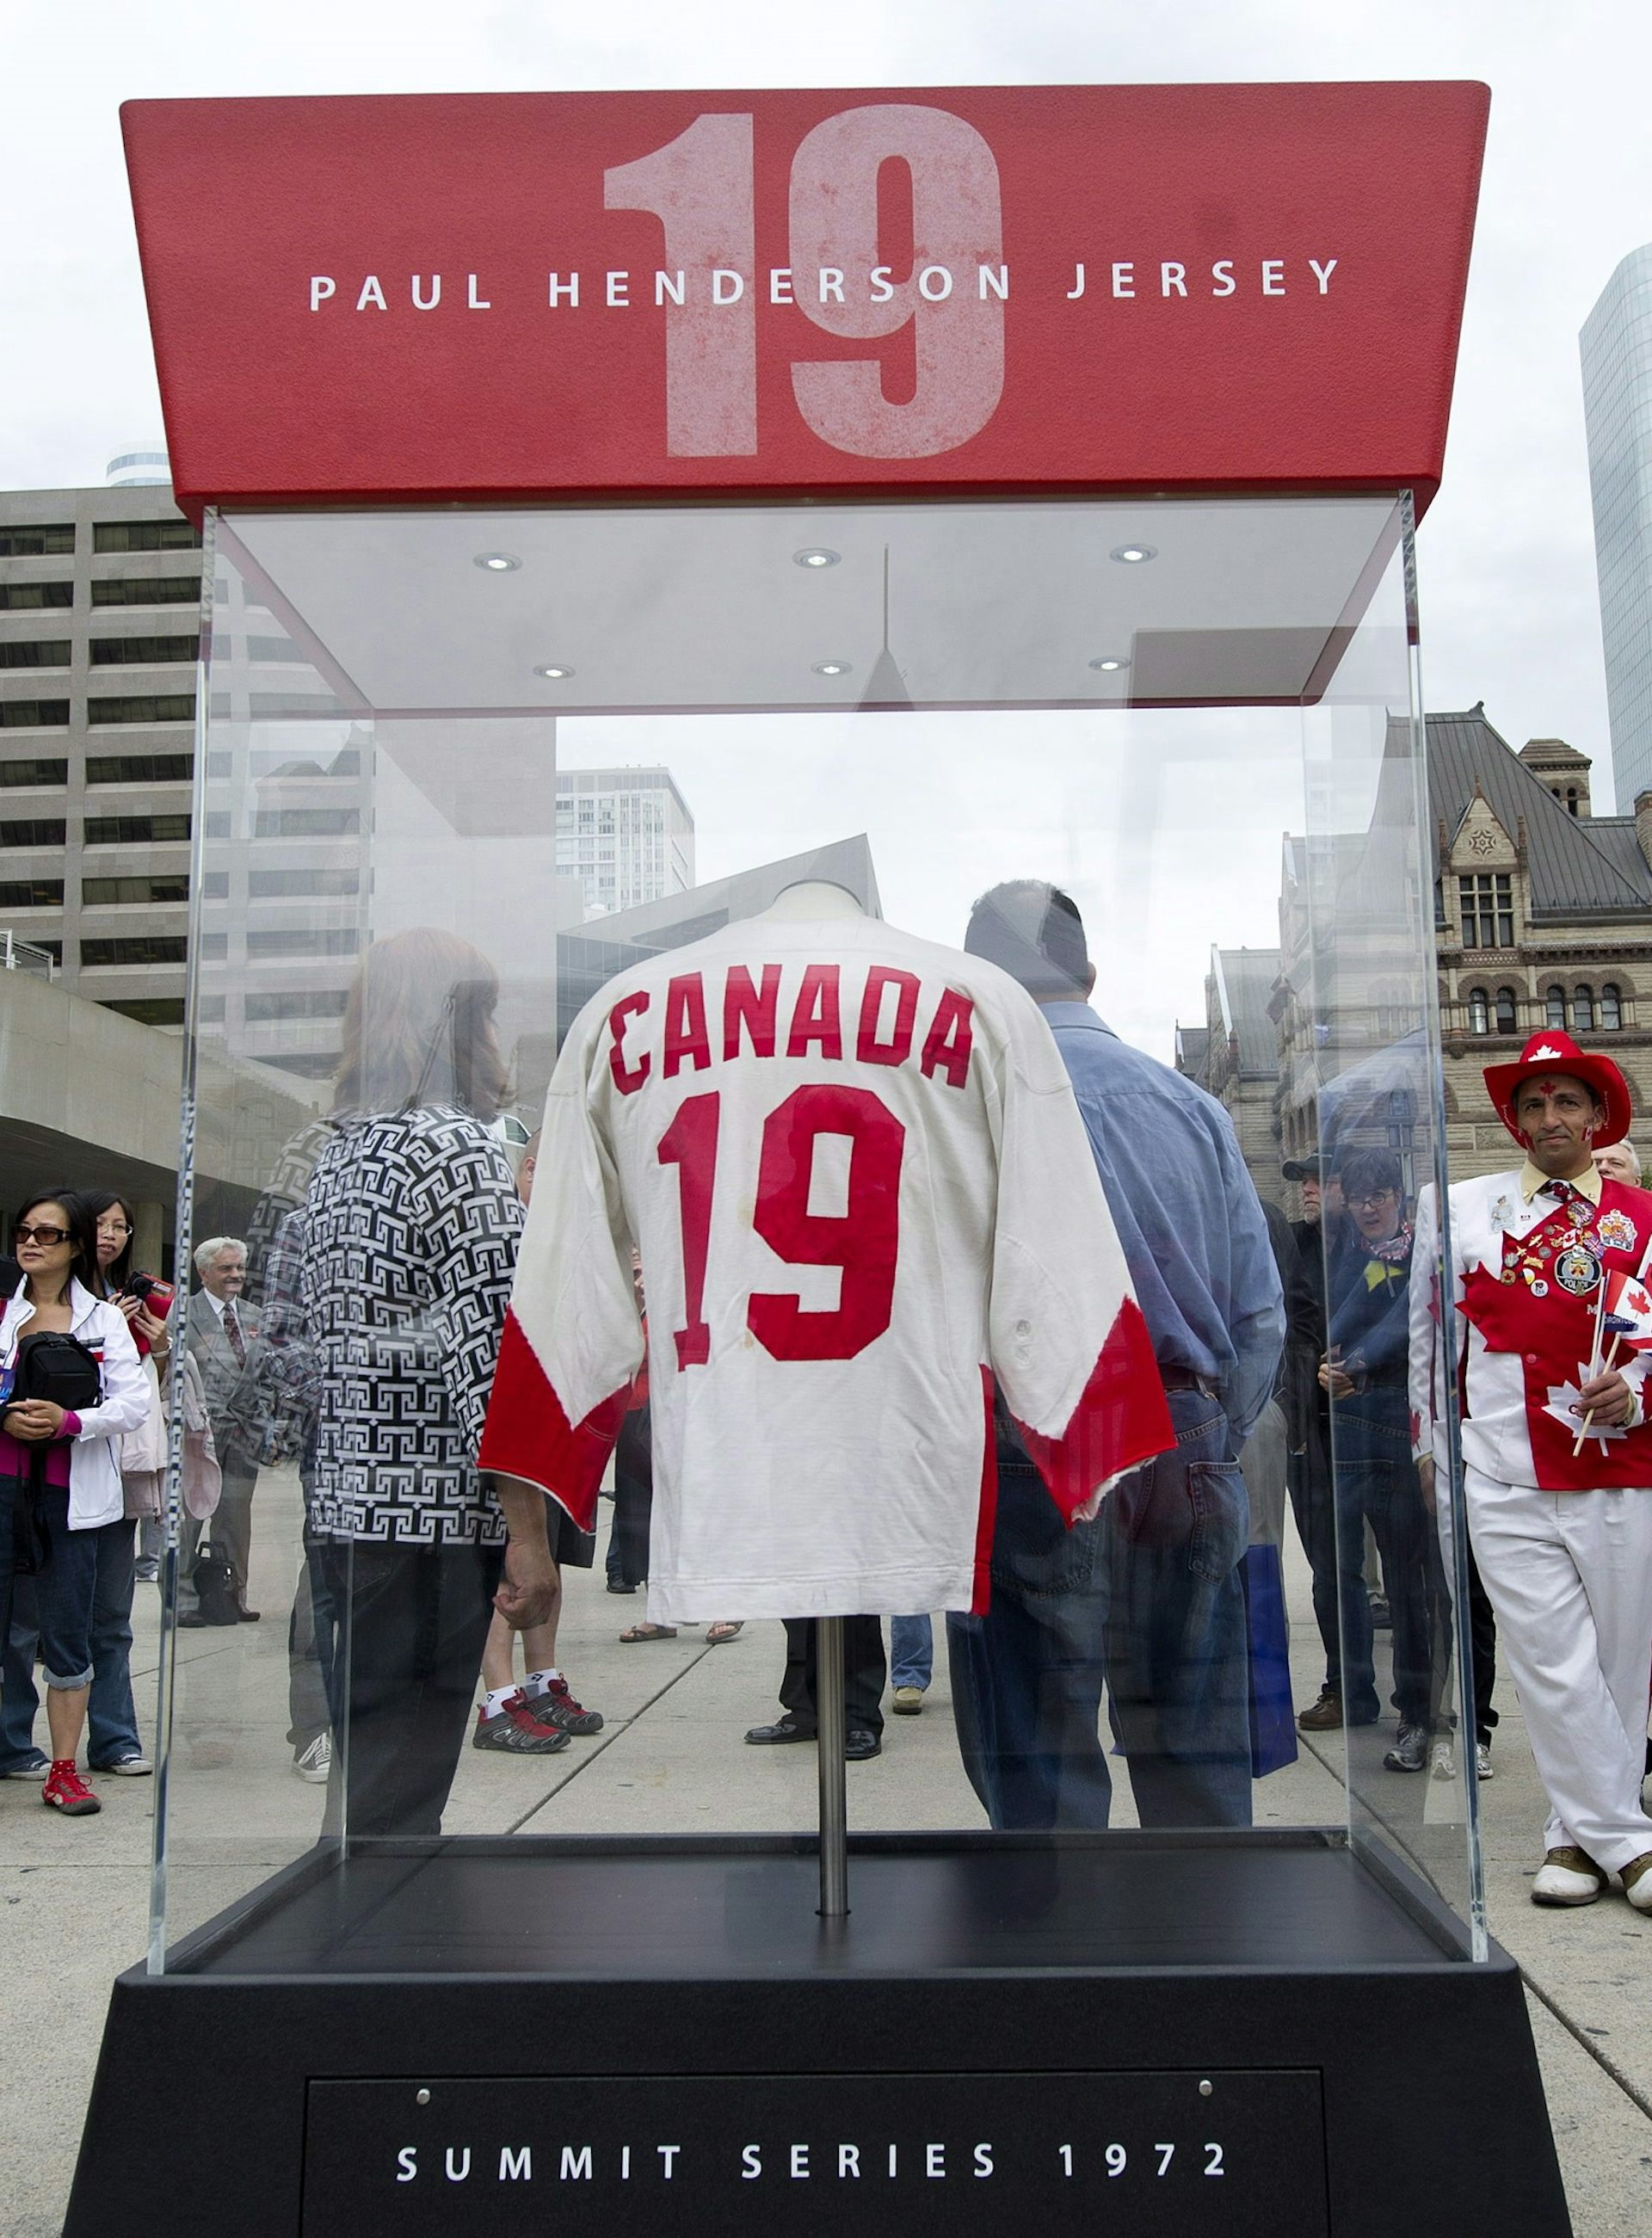 A white and red Canadian hockey jersey with the number 19 on the back is seen in a clear display case.